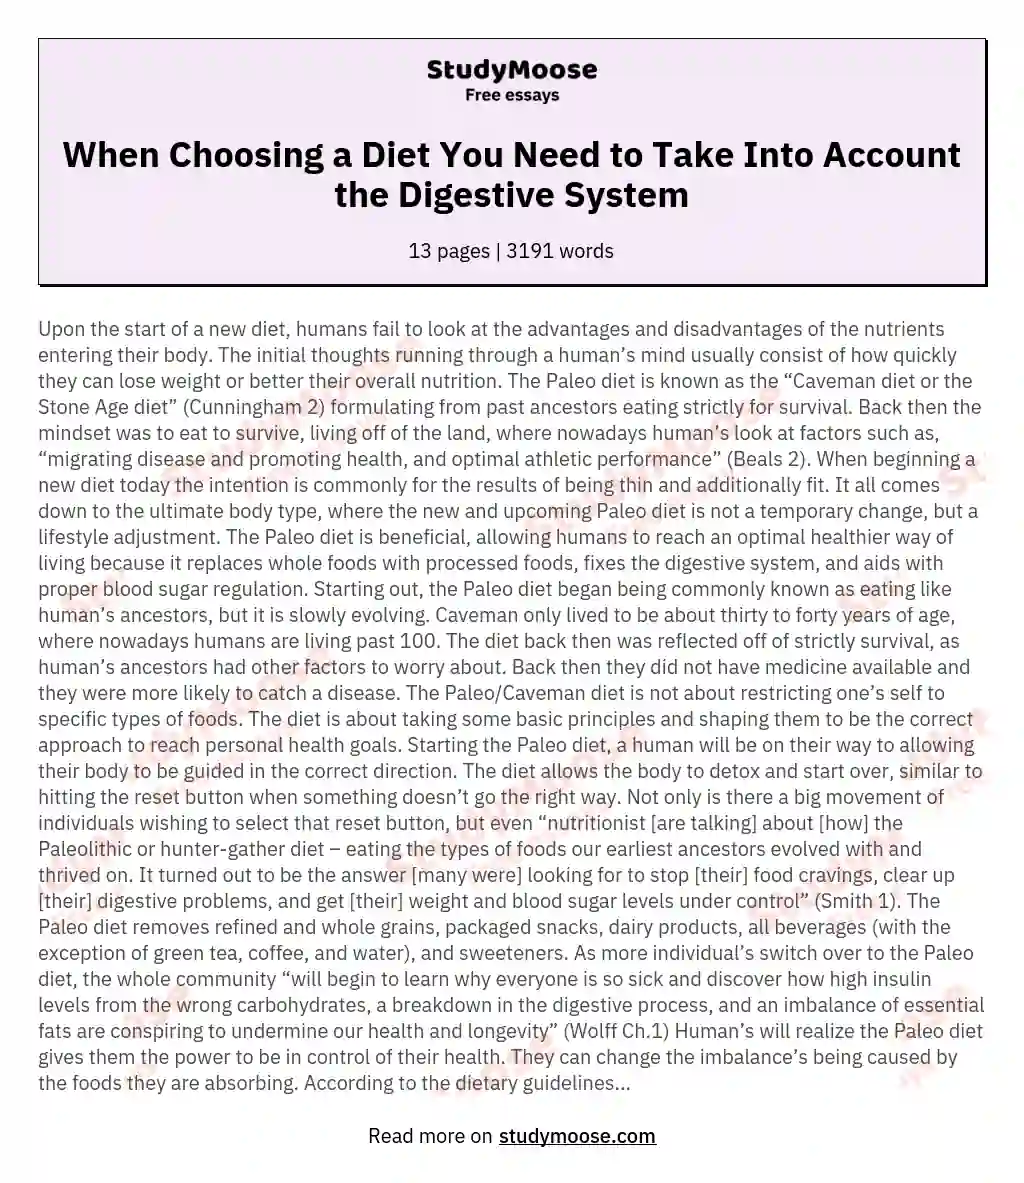 When Choosing a Diet You Need to Take Into Account the Digestive System essay